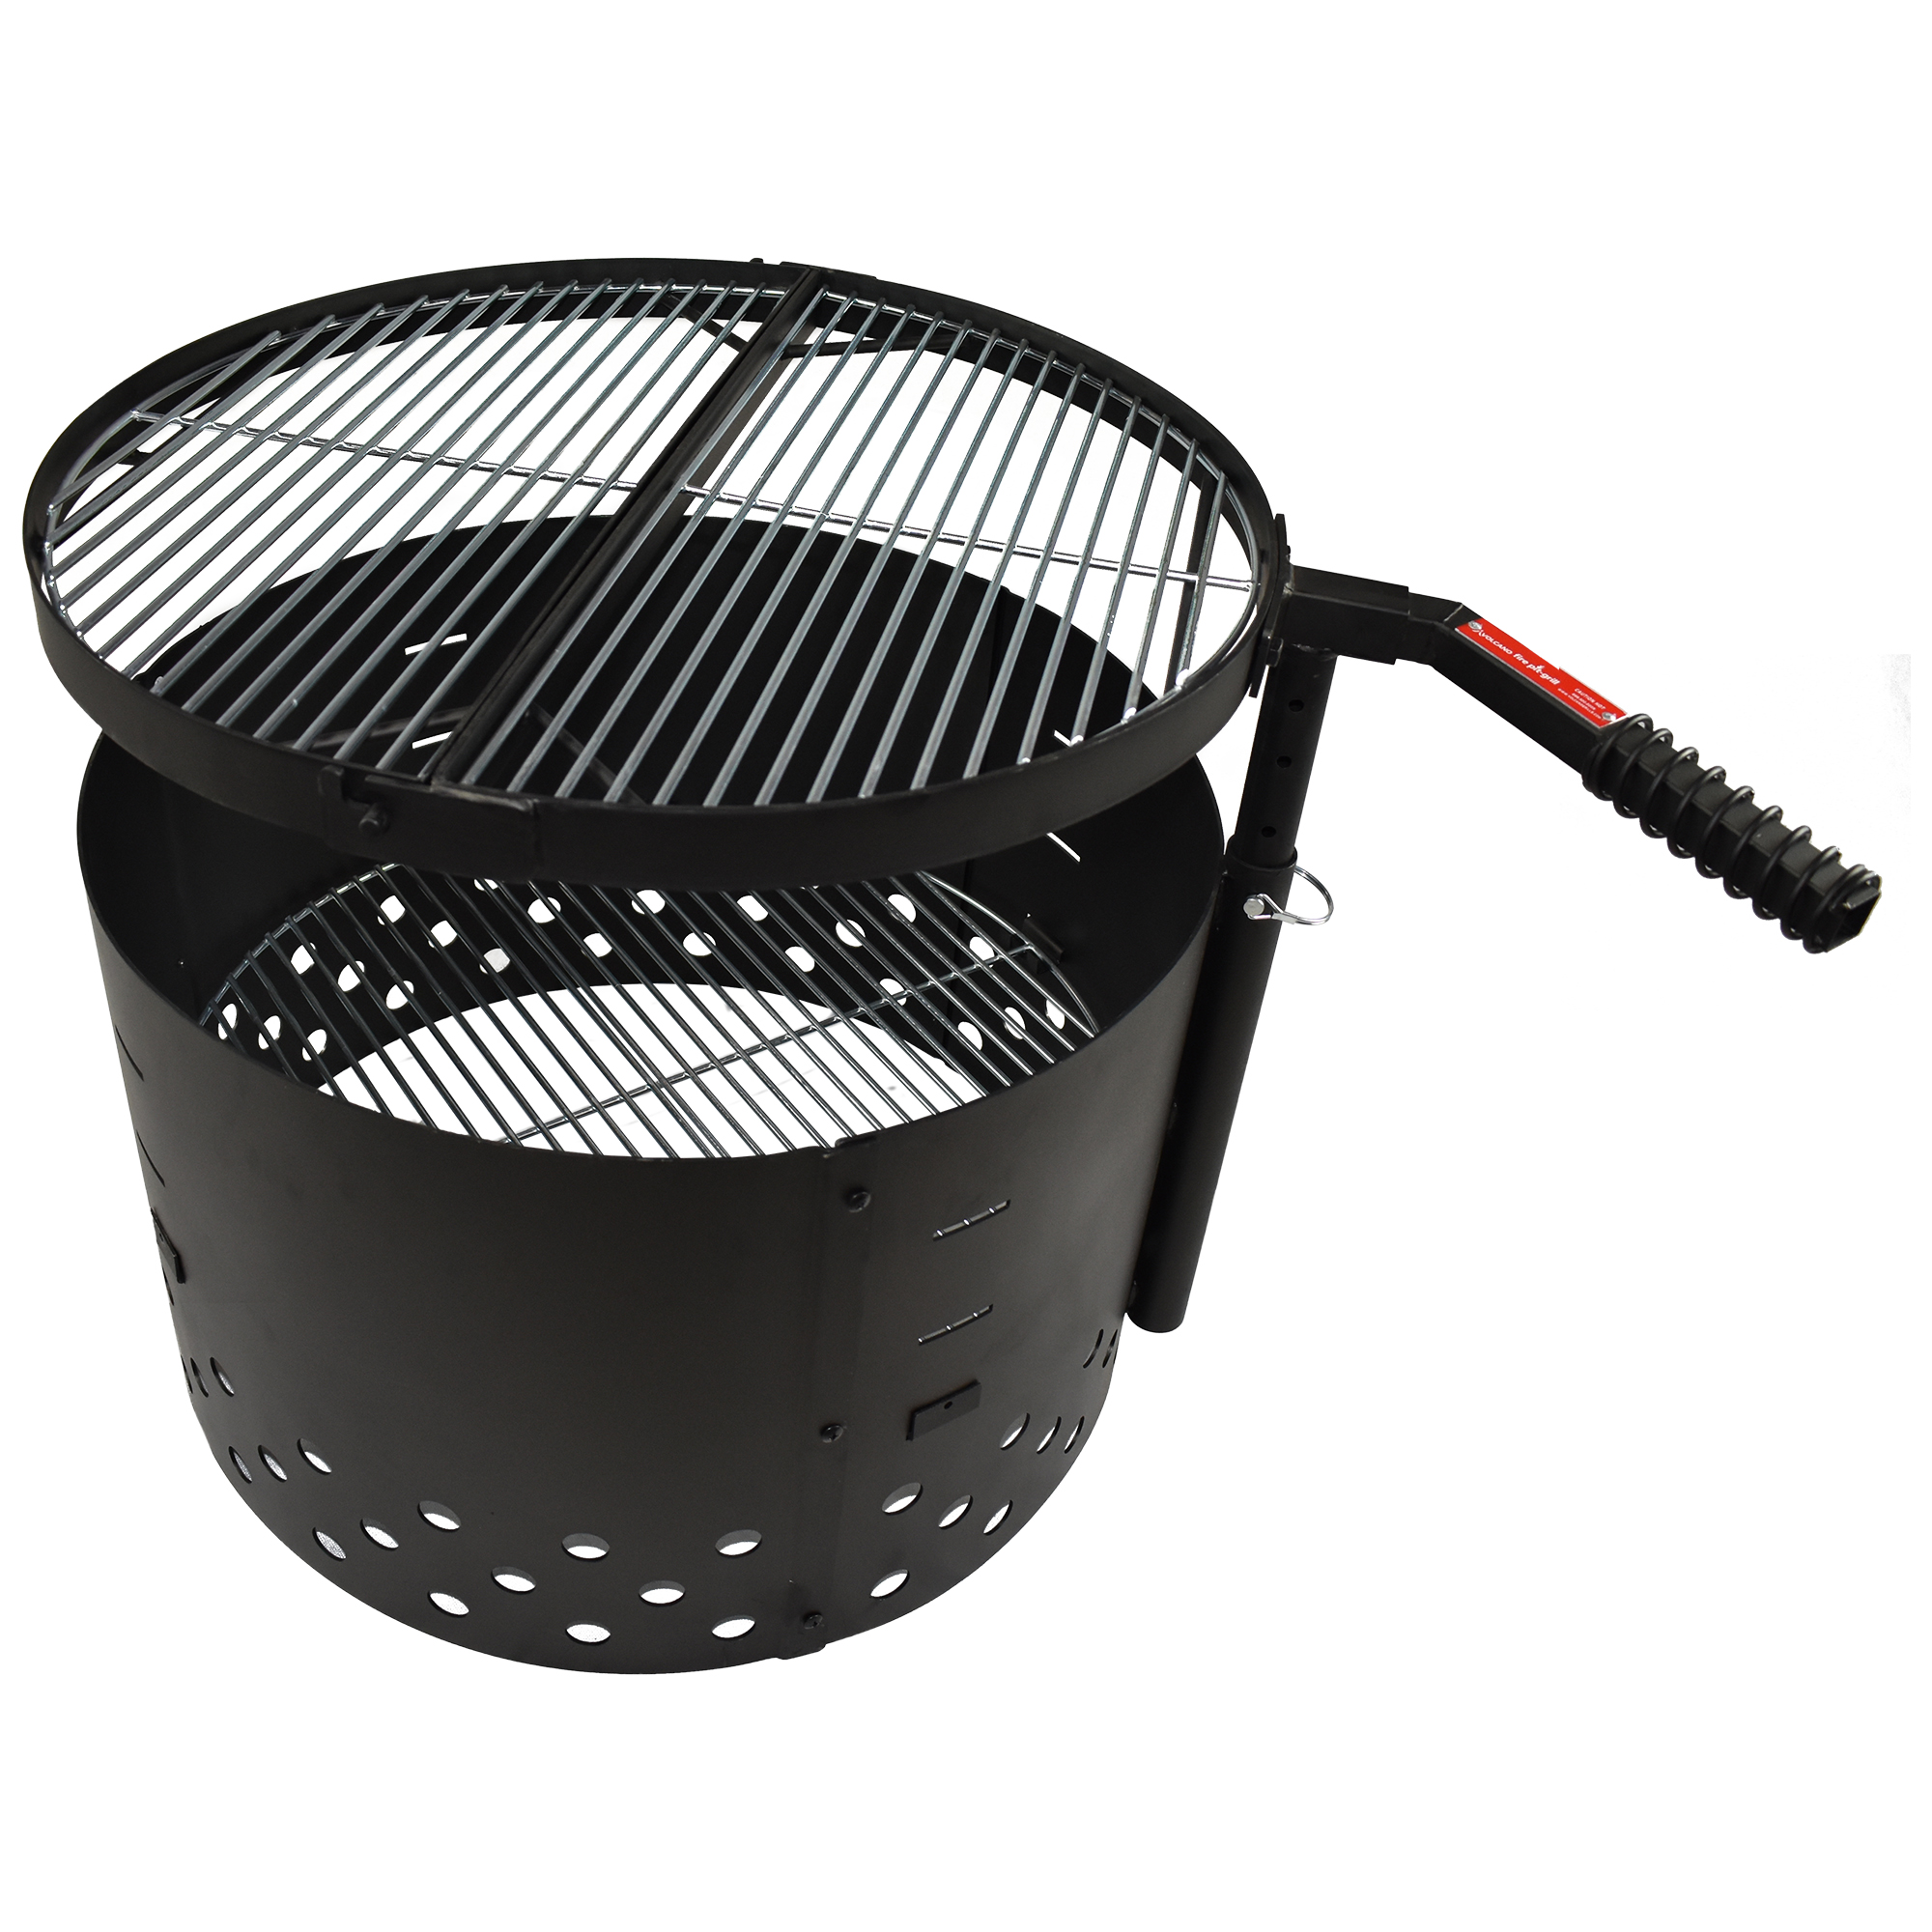 Volcano Fire Pit Grill Grills, The Fire Pit Grill